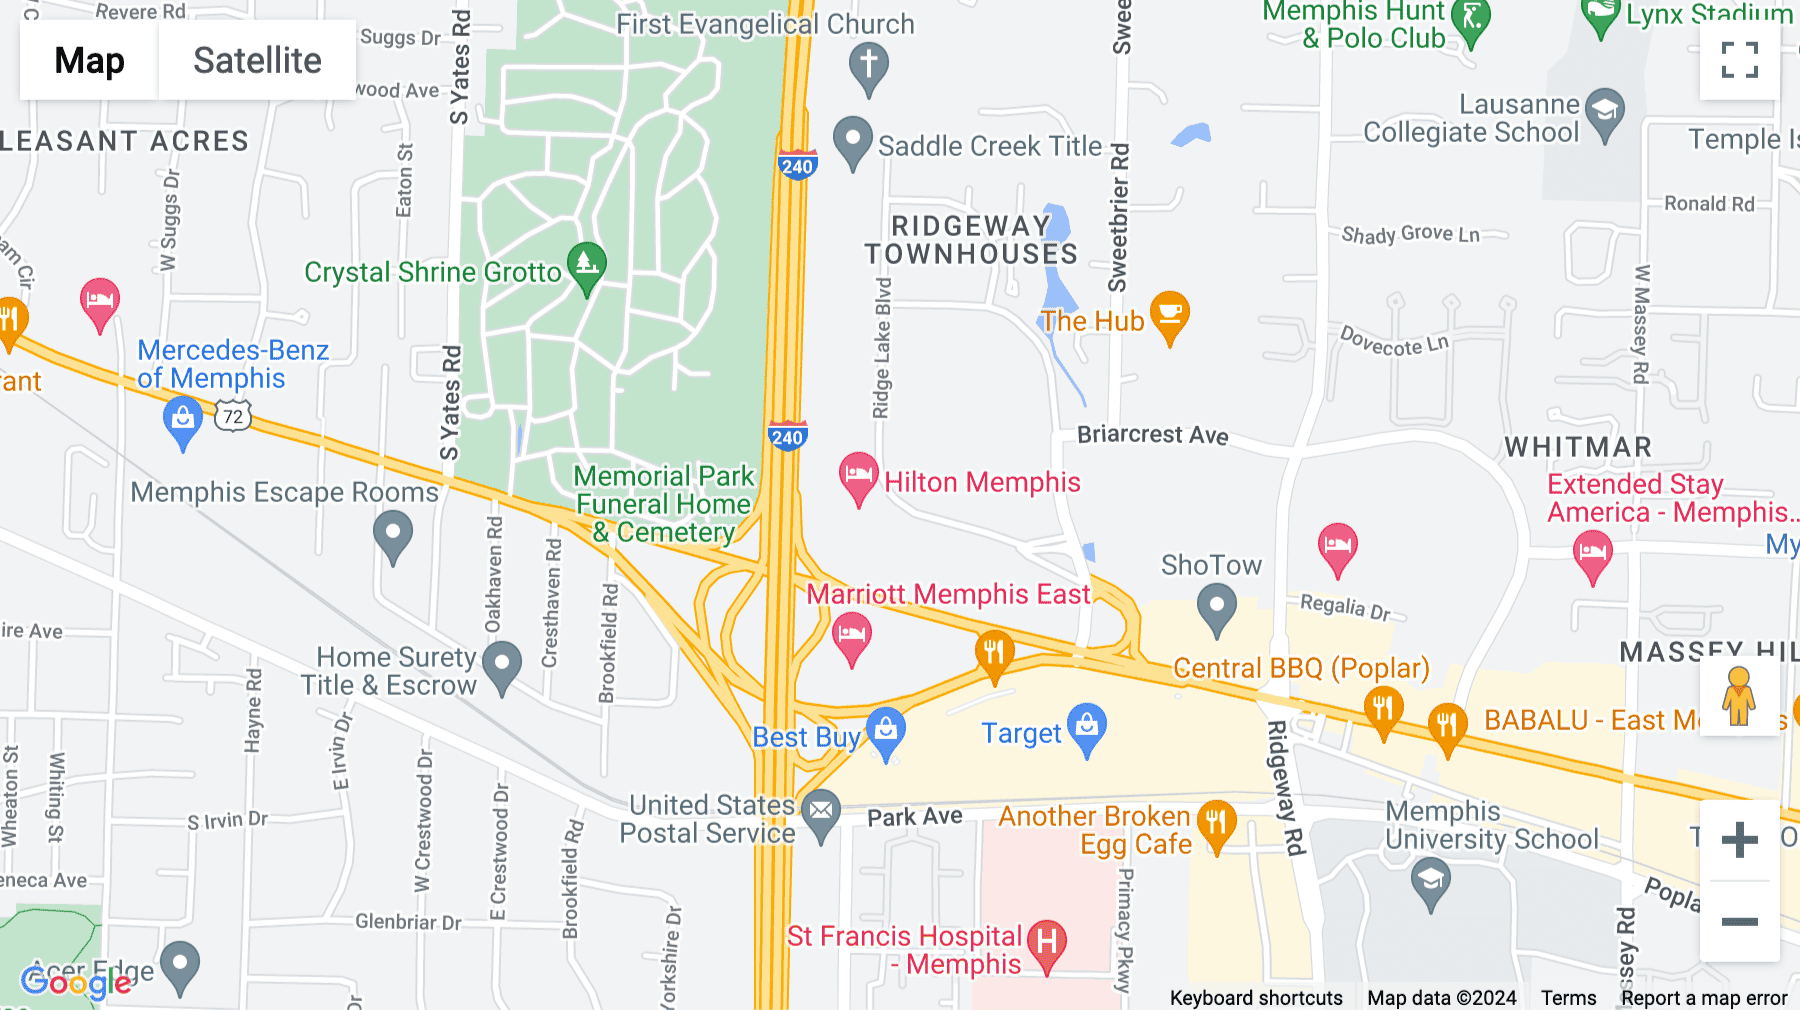 Click for interative map of 5865 Ridgeway Center Parkway, Suite 300, Memphis, Tennessee, Memphis